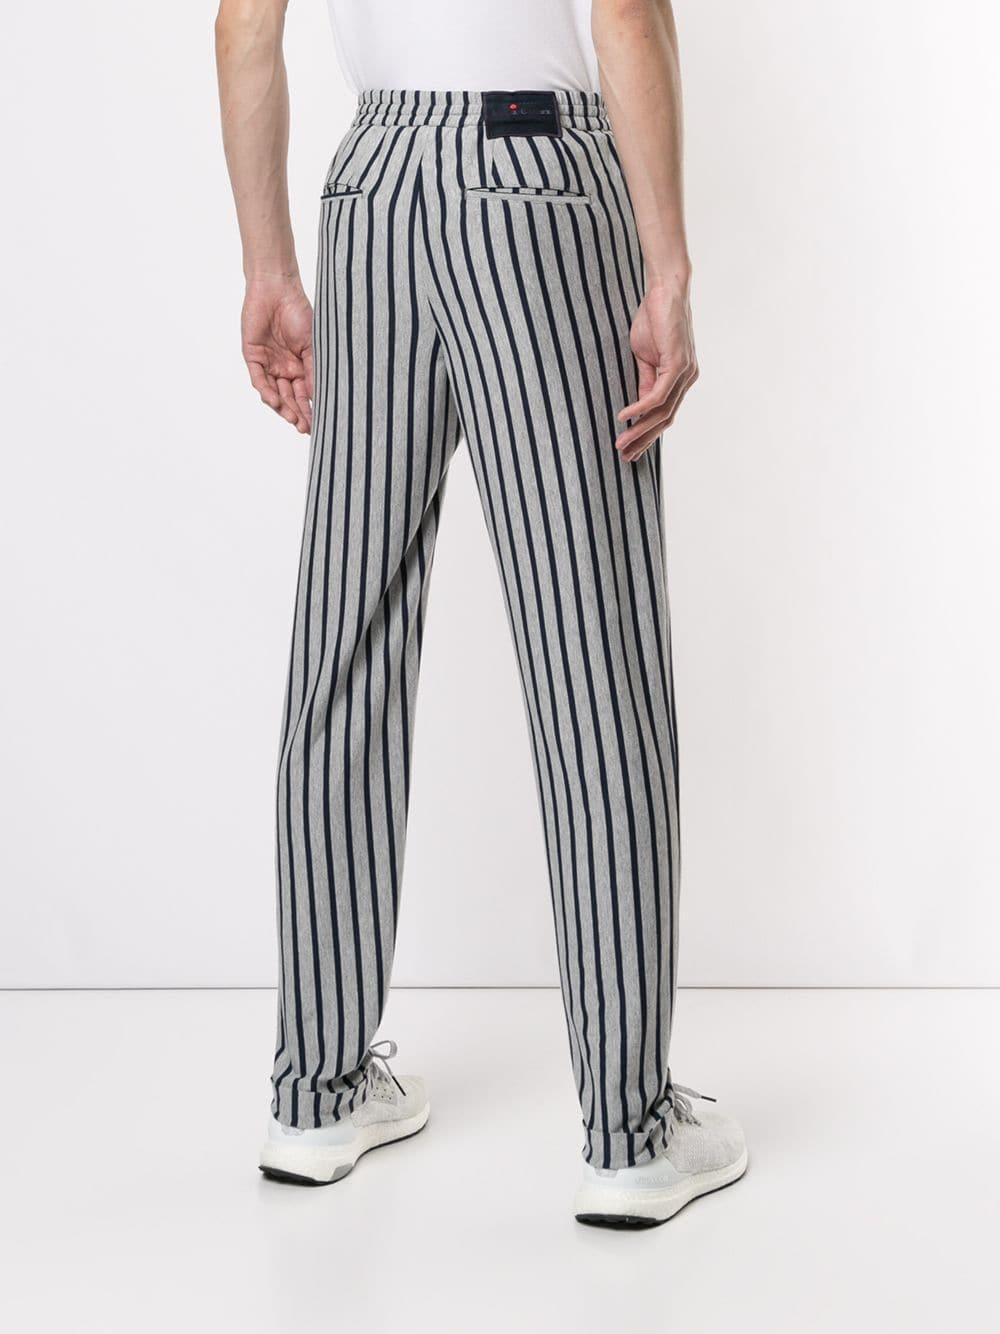 fitted striped pants